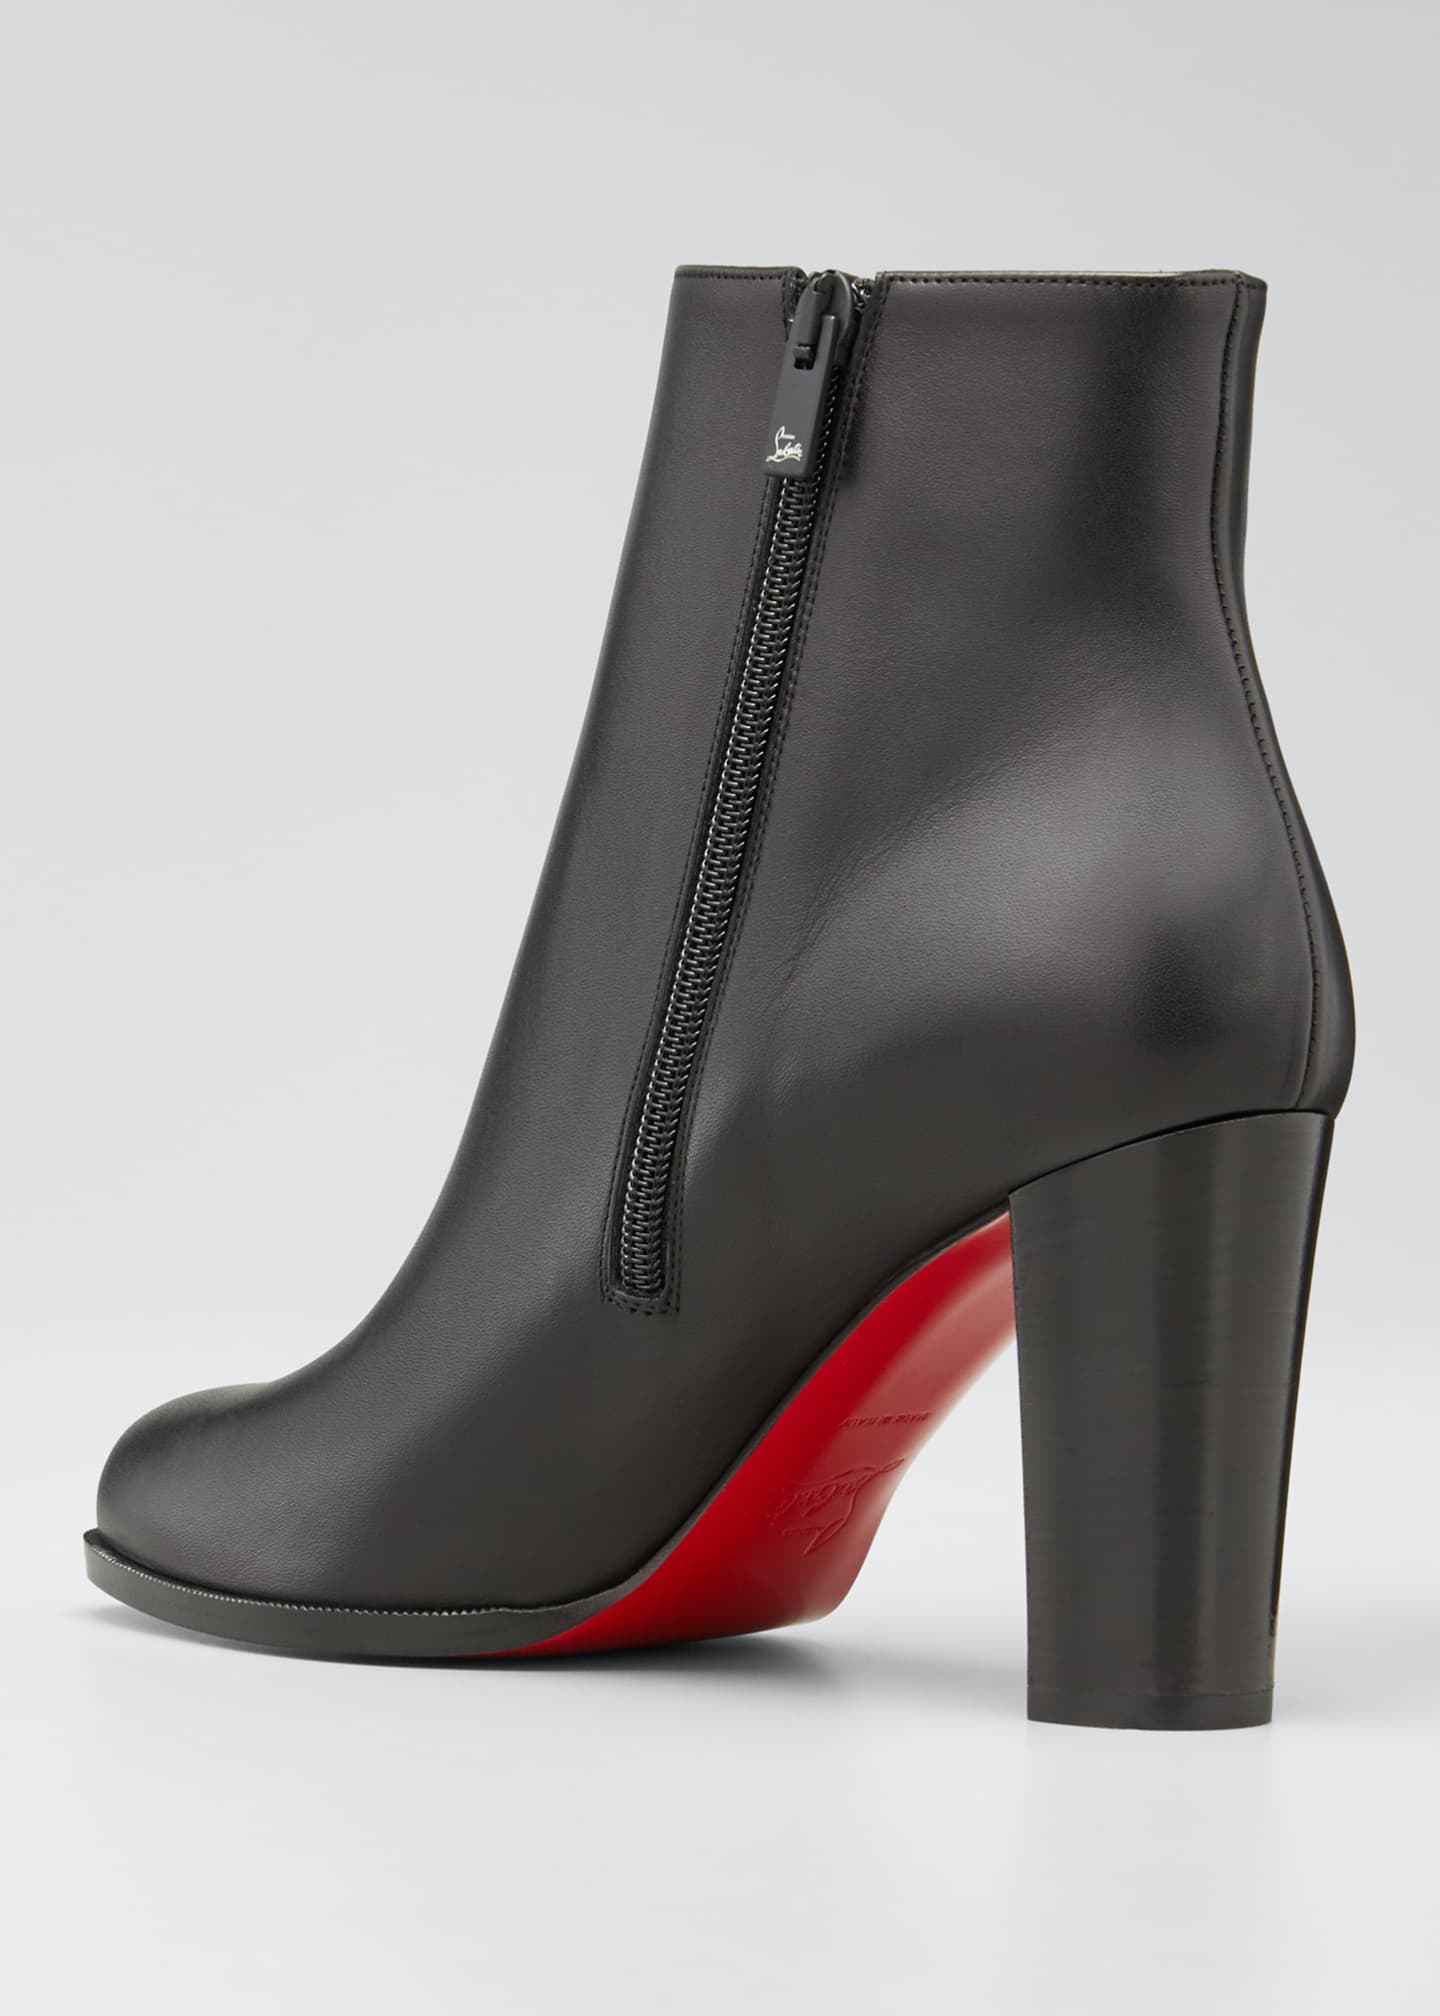 Louboutin Adox Leather Red Boots - Bergdorf Goodman